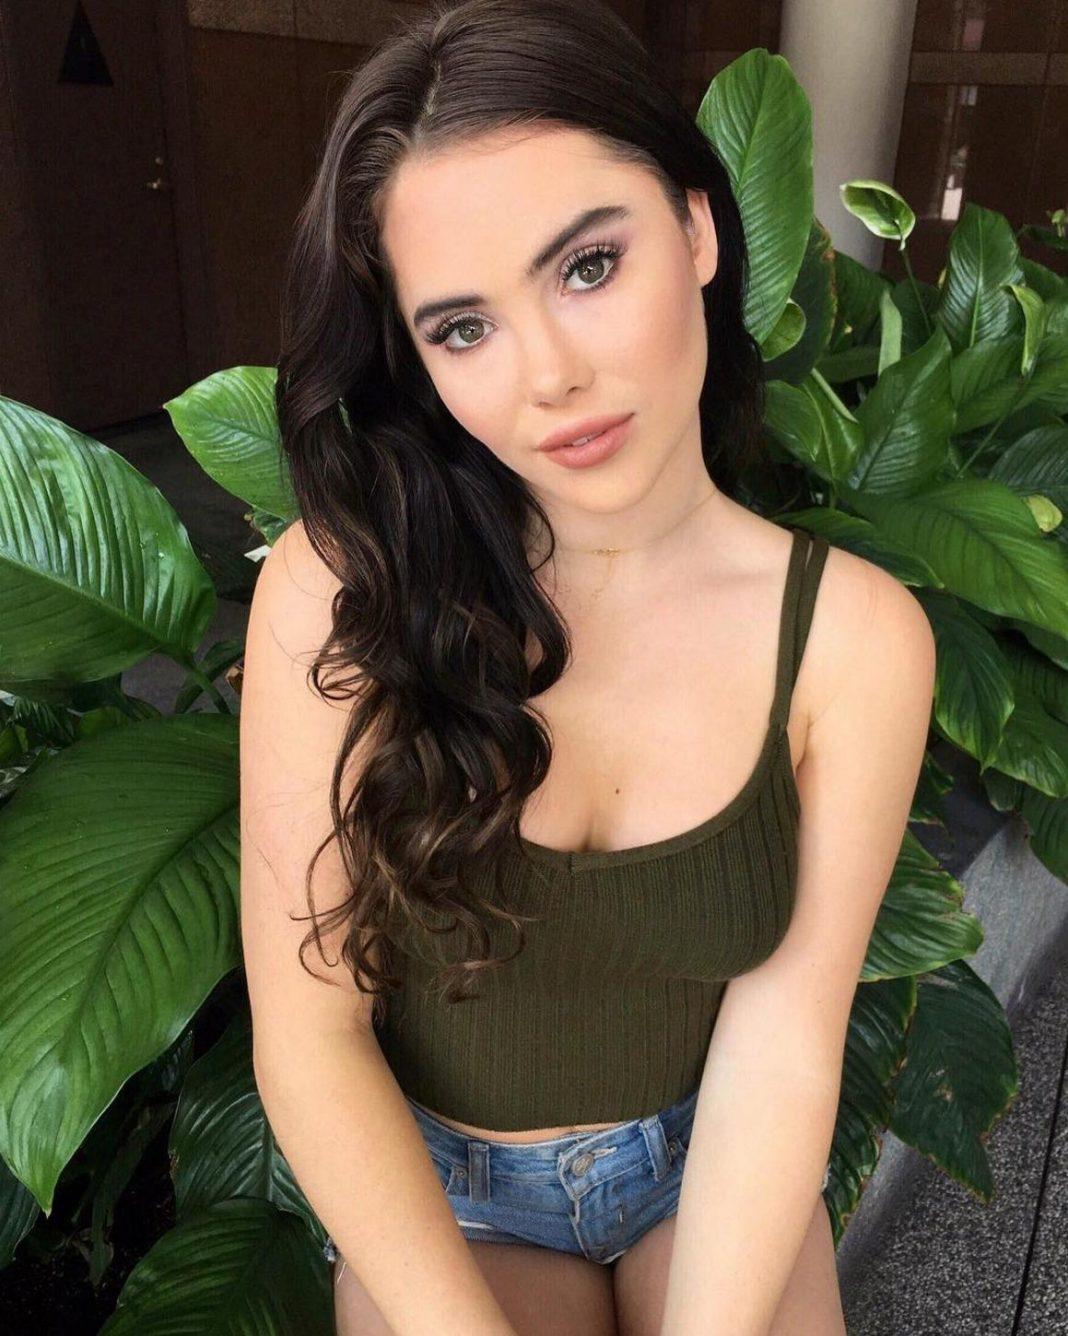 46 McKayla Maroney Nude Pictures That Are Sure To Put Her Under The Spotlight | Best Of Comic Books